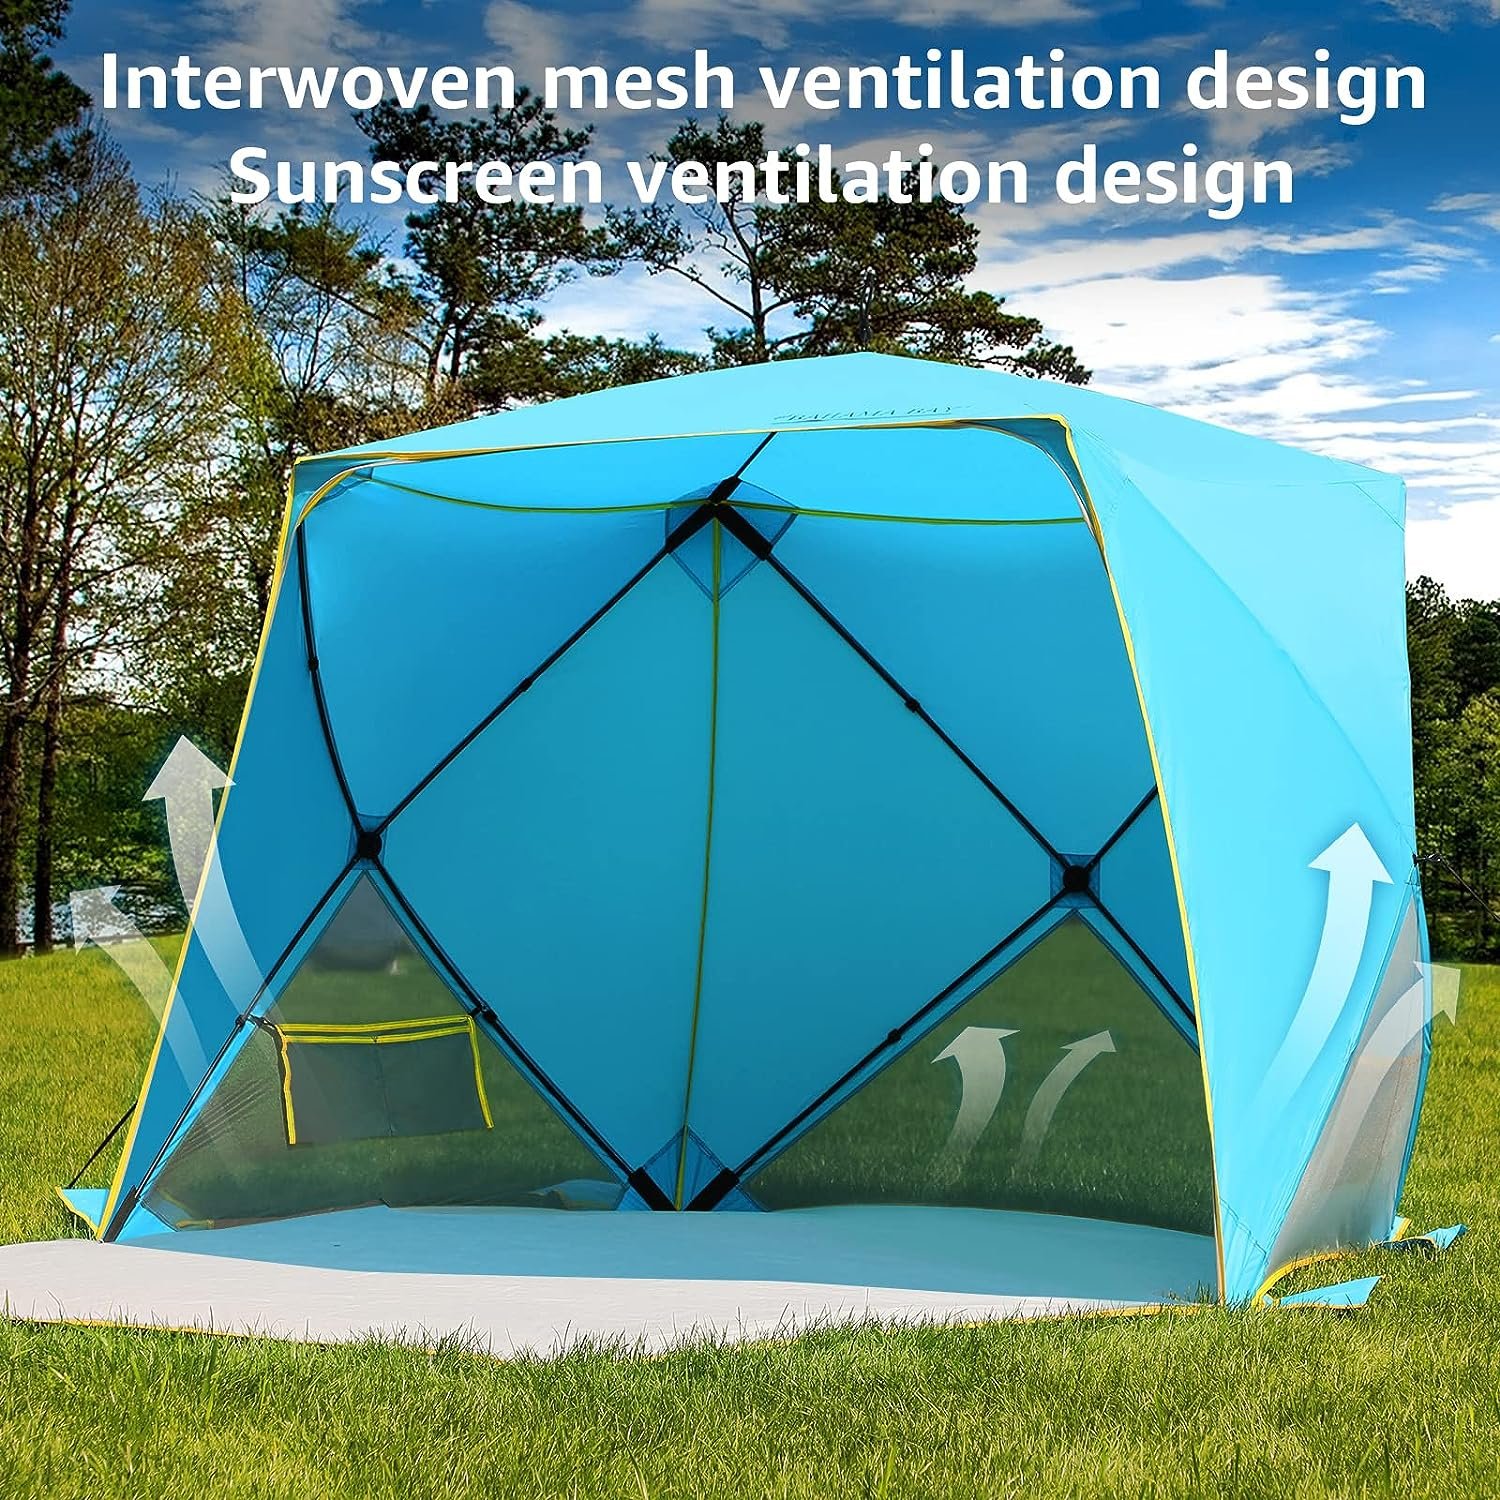 Old Bahama Bay Pop Up Beach Tent Review - Reliable Design!